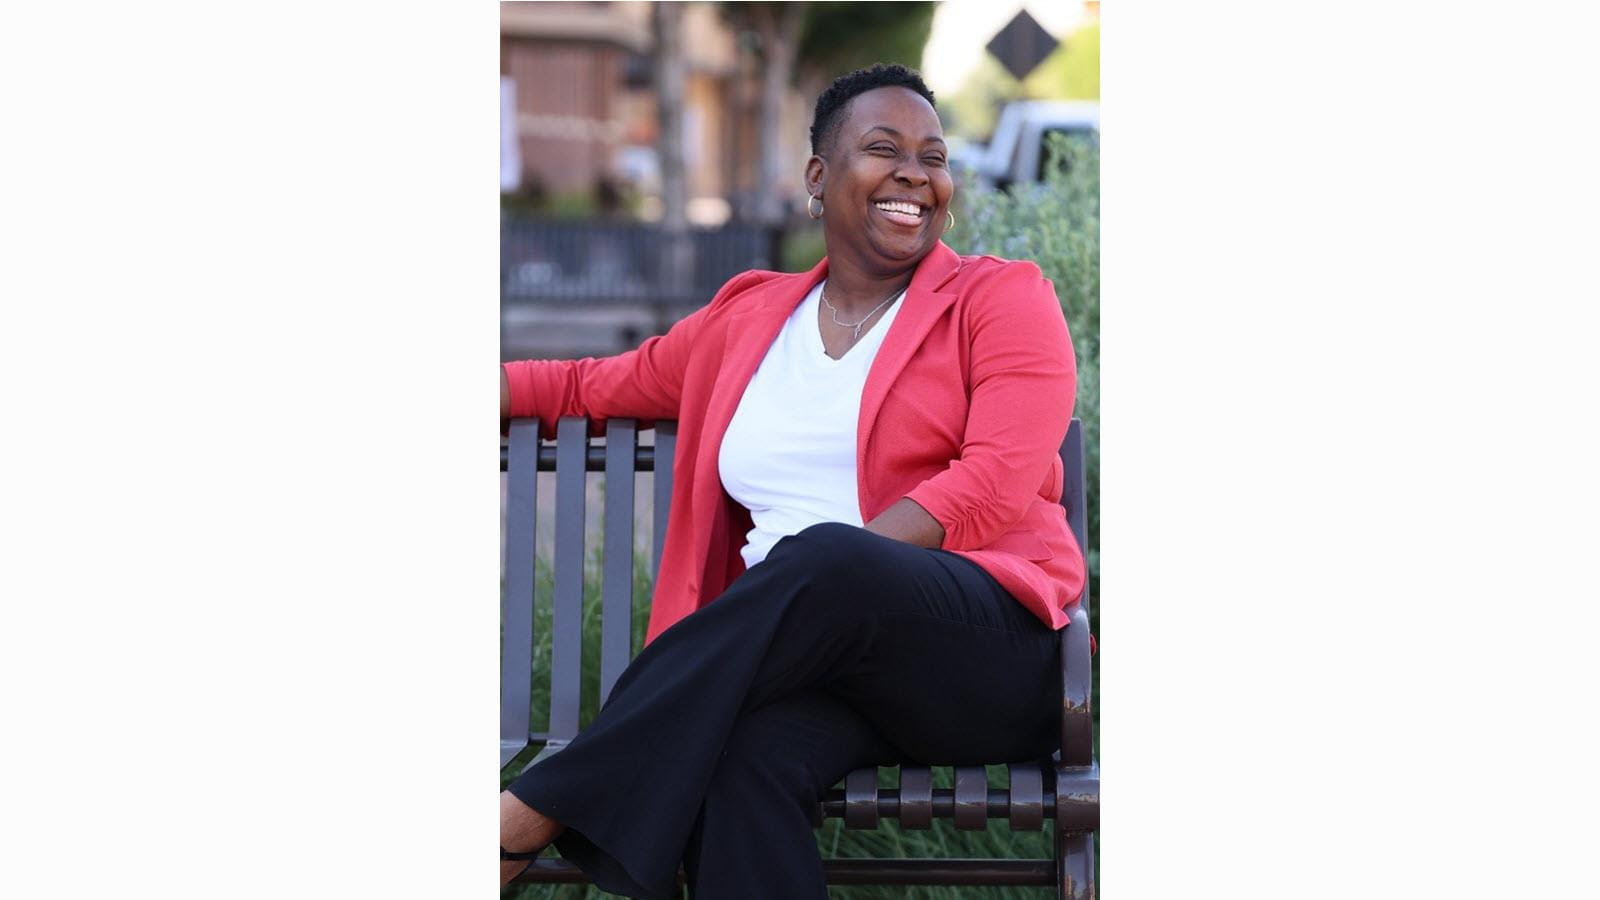 Patient advocate and storyteller Brittany Clayborne